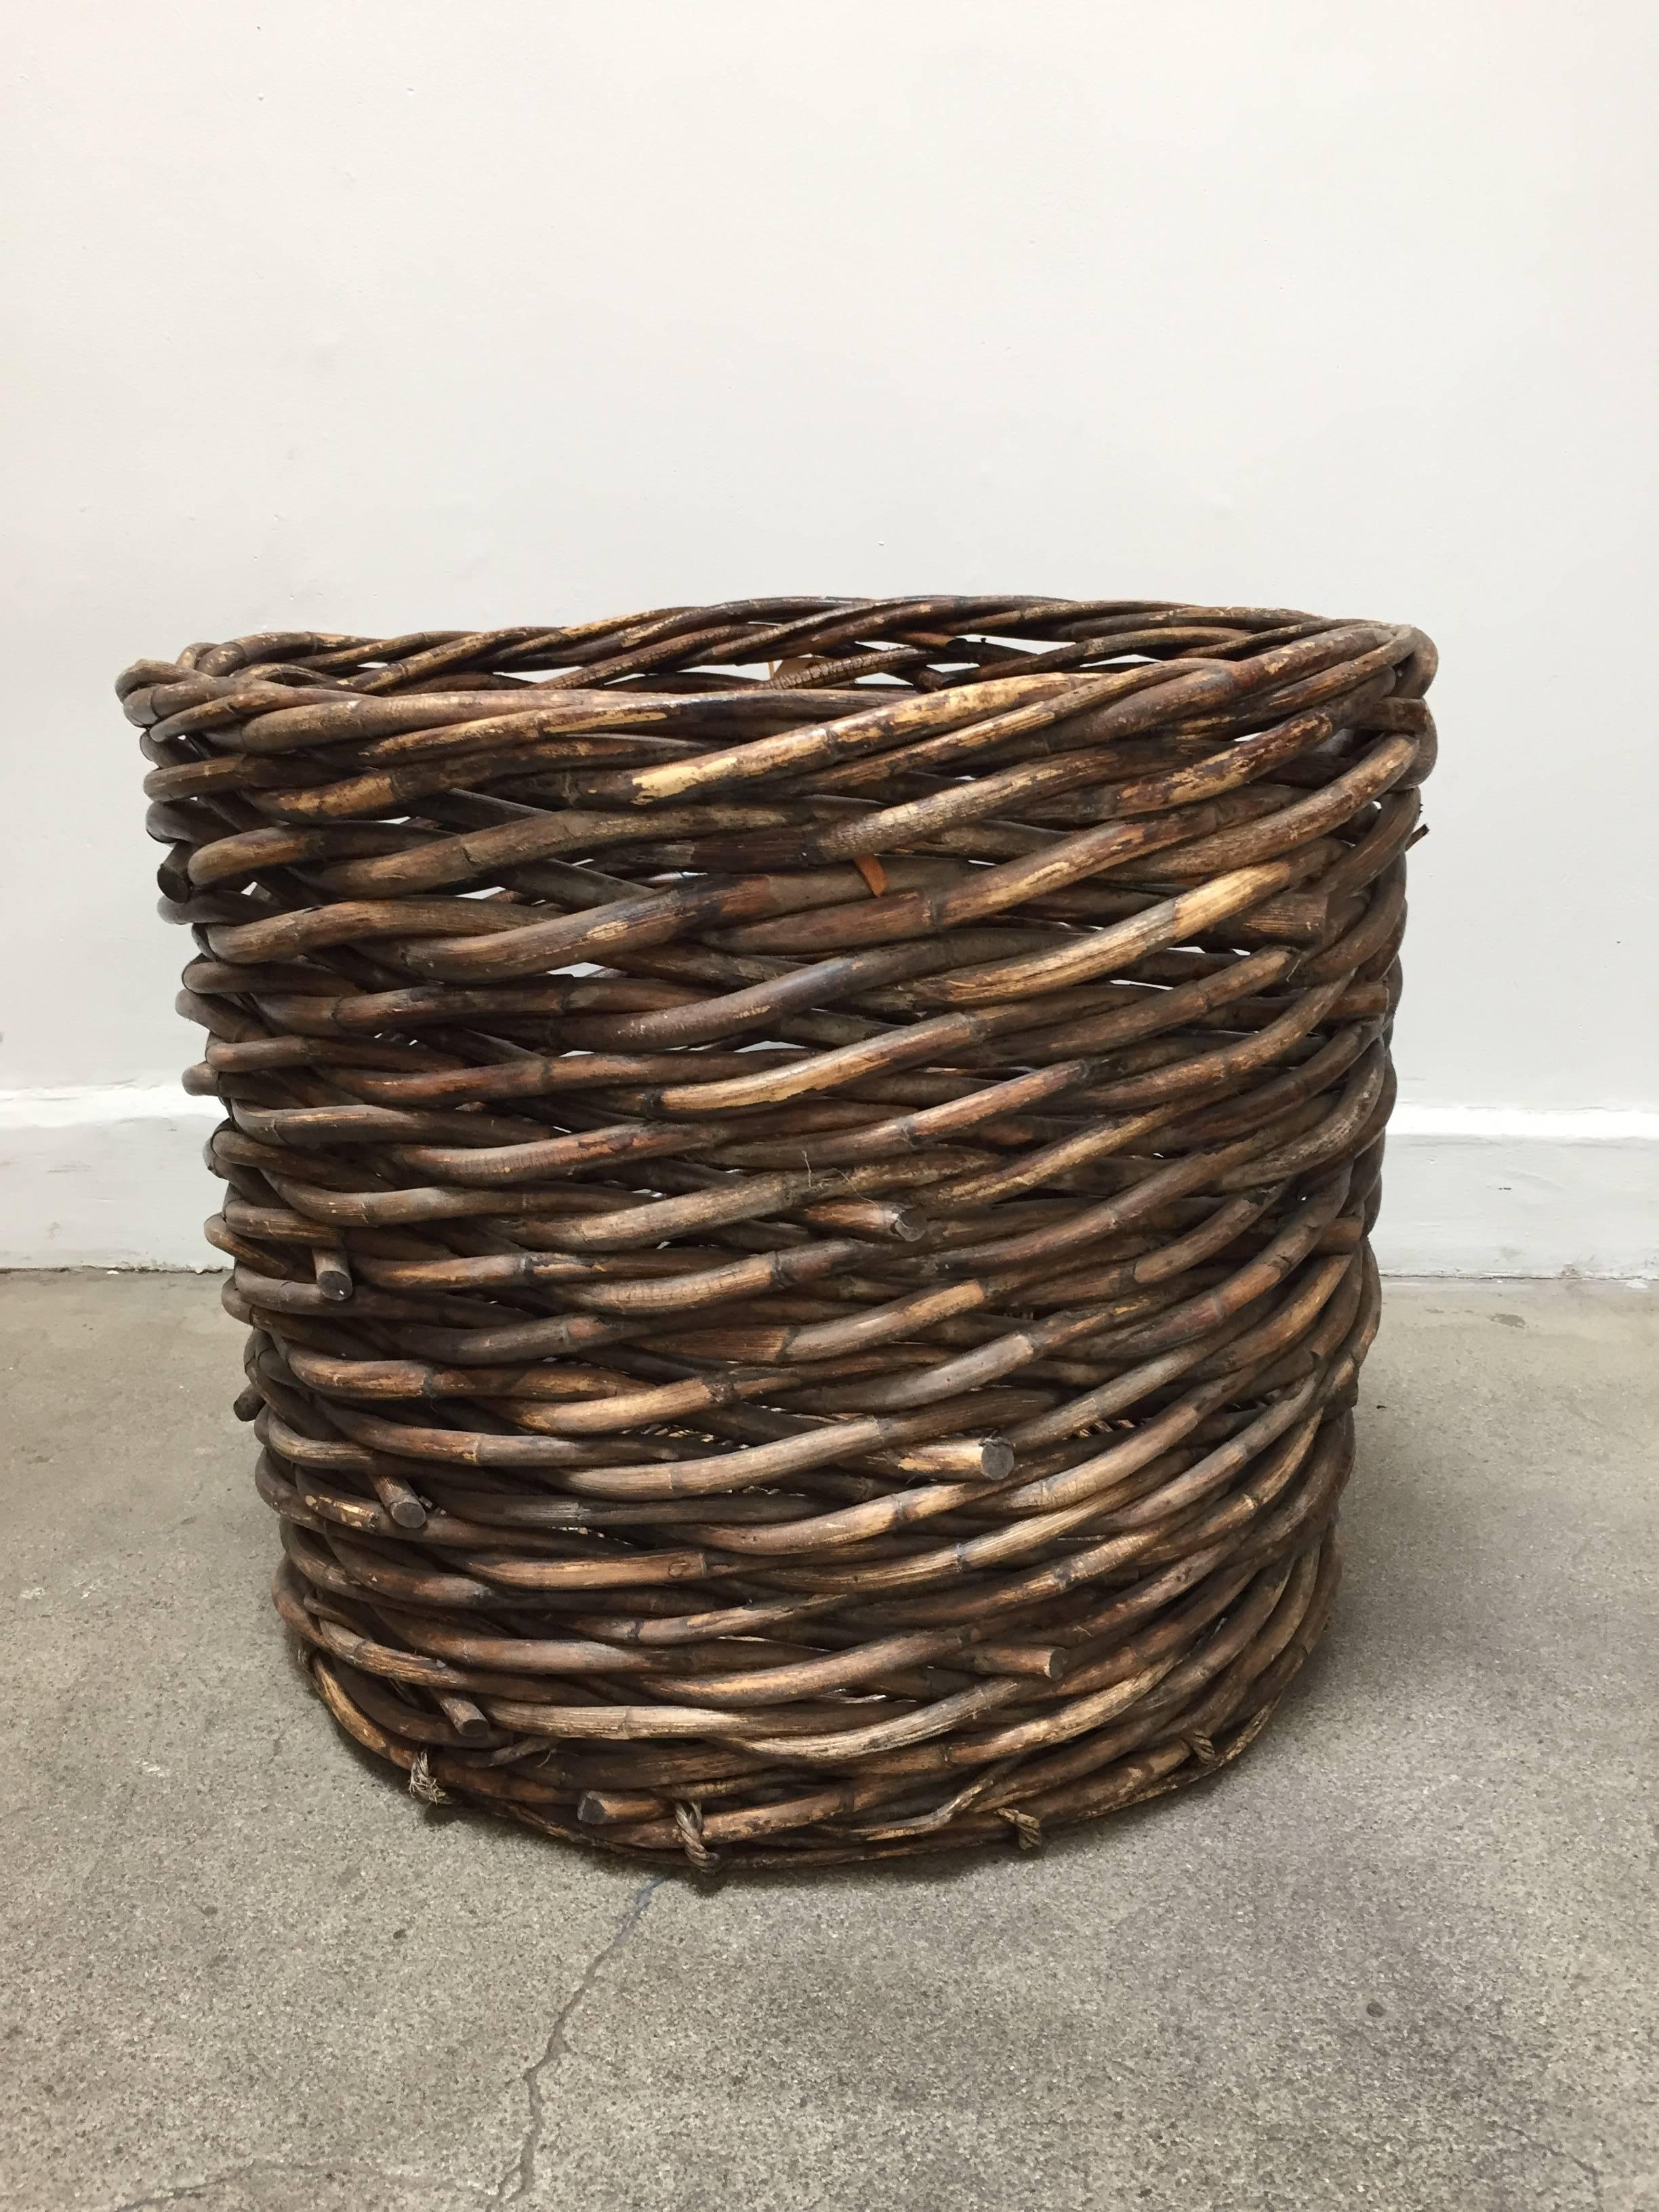 Large French vineyard harvest wicker basket.
Classic oversized French wicker basket.
Handmade and Handwoven of a thick wicker in superb condition and a lovely warm patina. 
Art and crafts rustic style for your country barn house.
Great as a